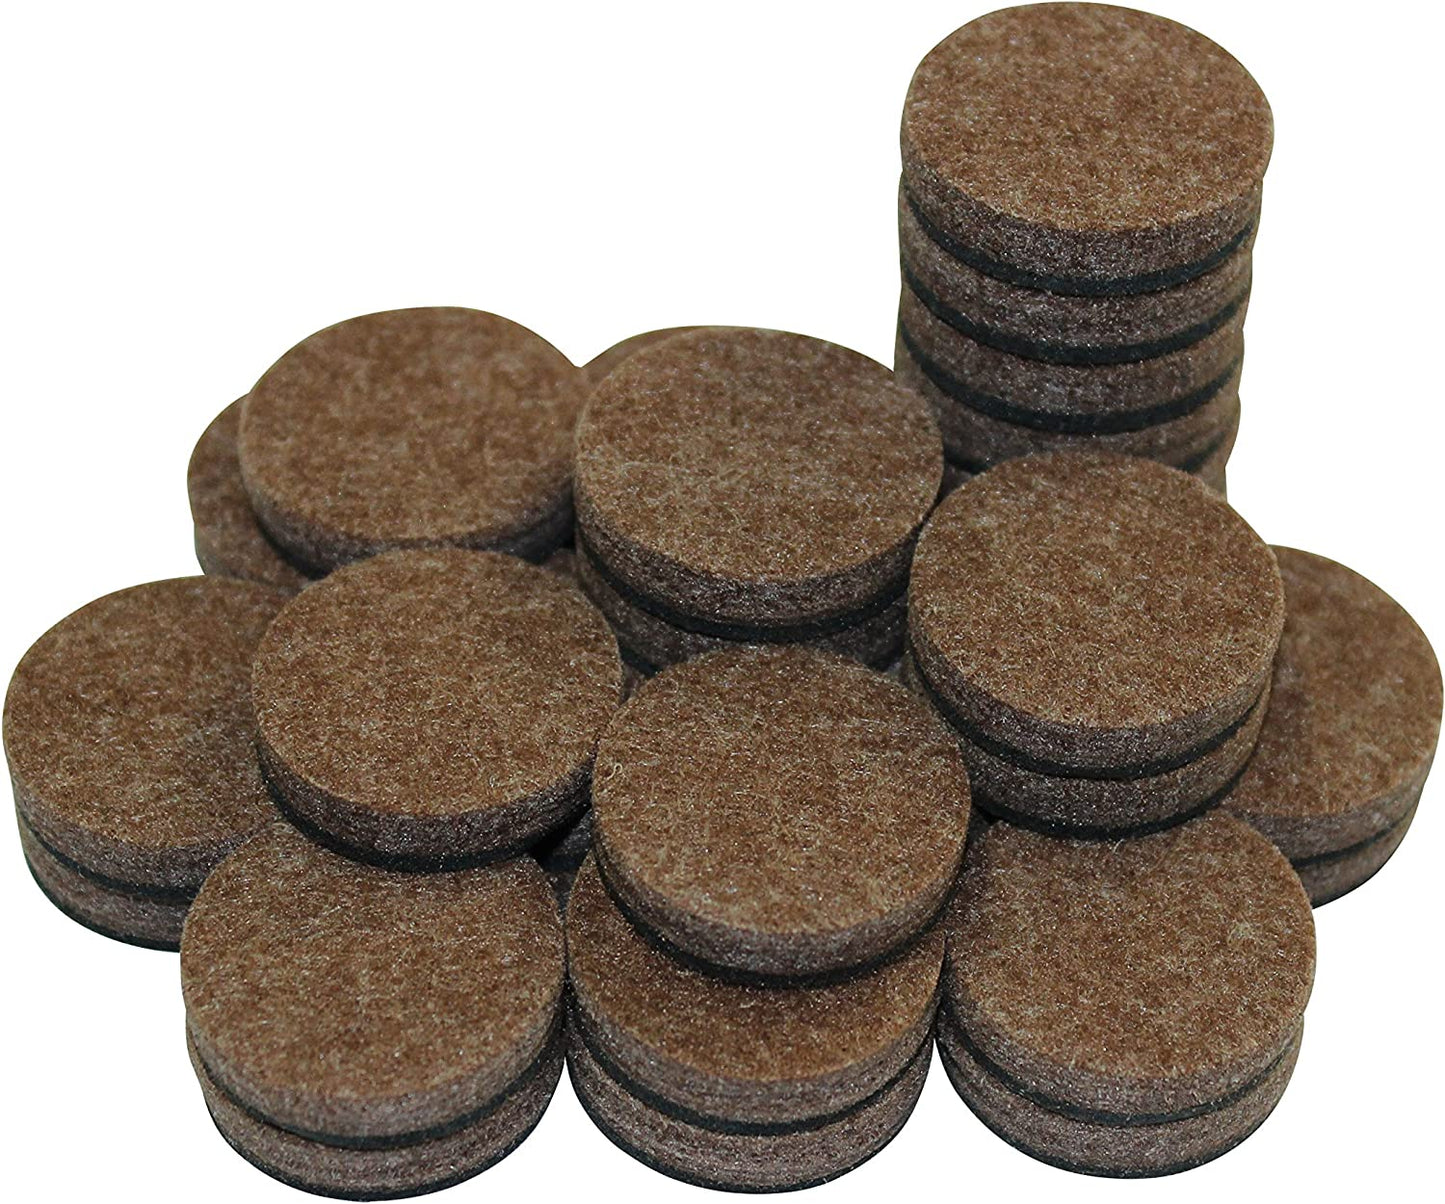 (50 Pack) 1" Round Self-Stick Furniture Felt Pads Pack for Hardwood & Laminate Flooring Protection I Heavy Duty Pads Prevents Furniture Scratches l Eco-Friendly Brown Linen Furniture Feet Pads